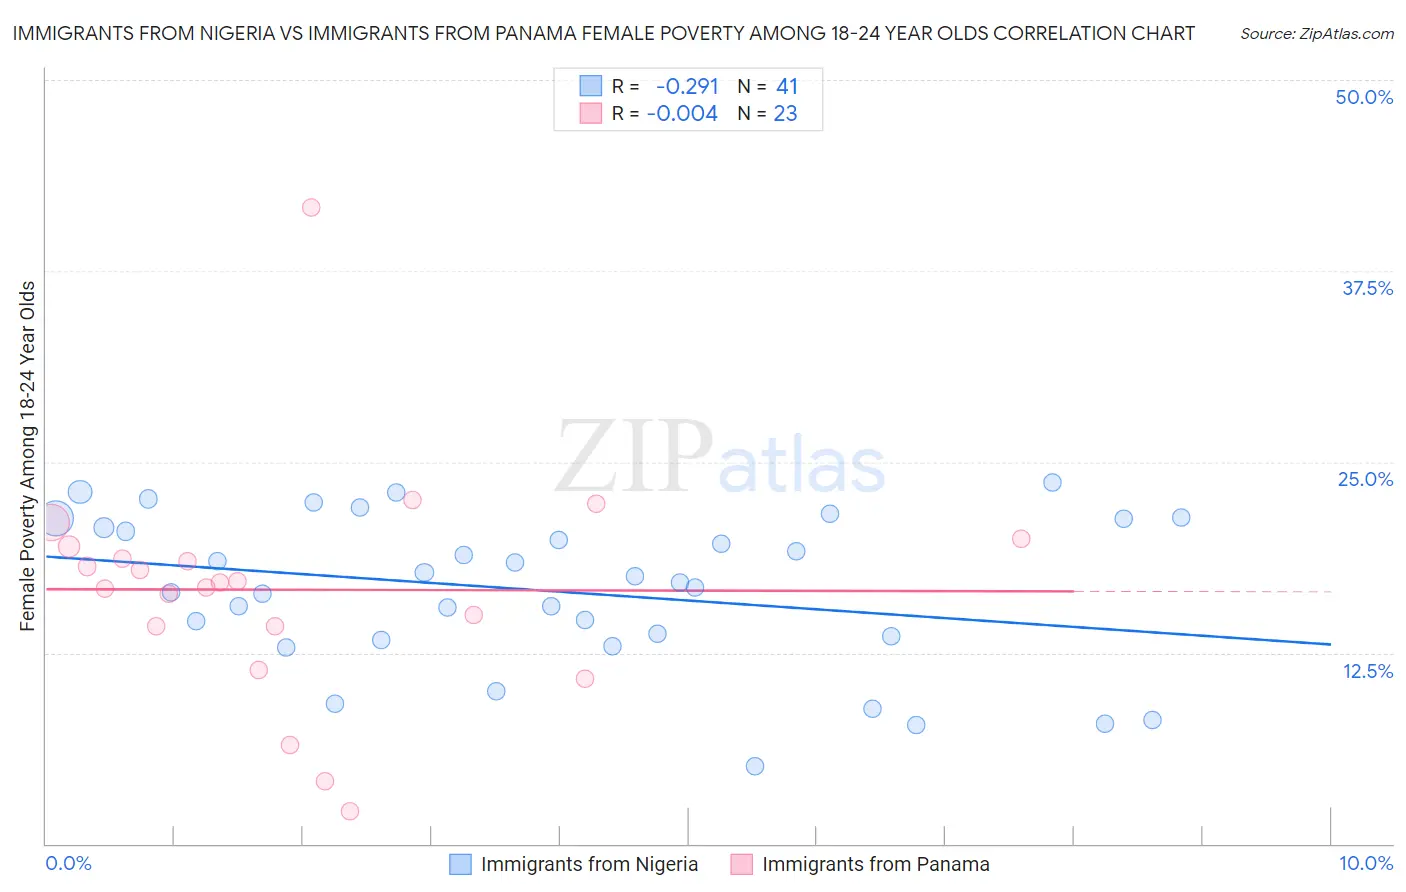 Immigrants from Nigeria vs Immigrants from Panama Female Poverty Among 18-24 Year Olds